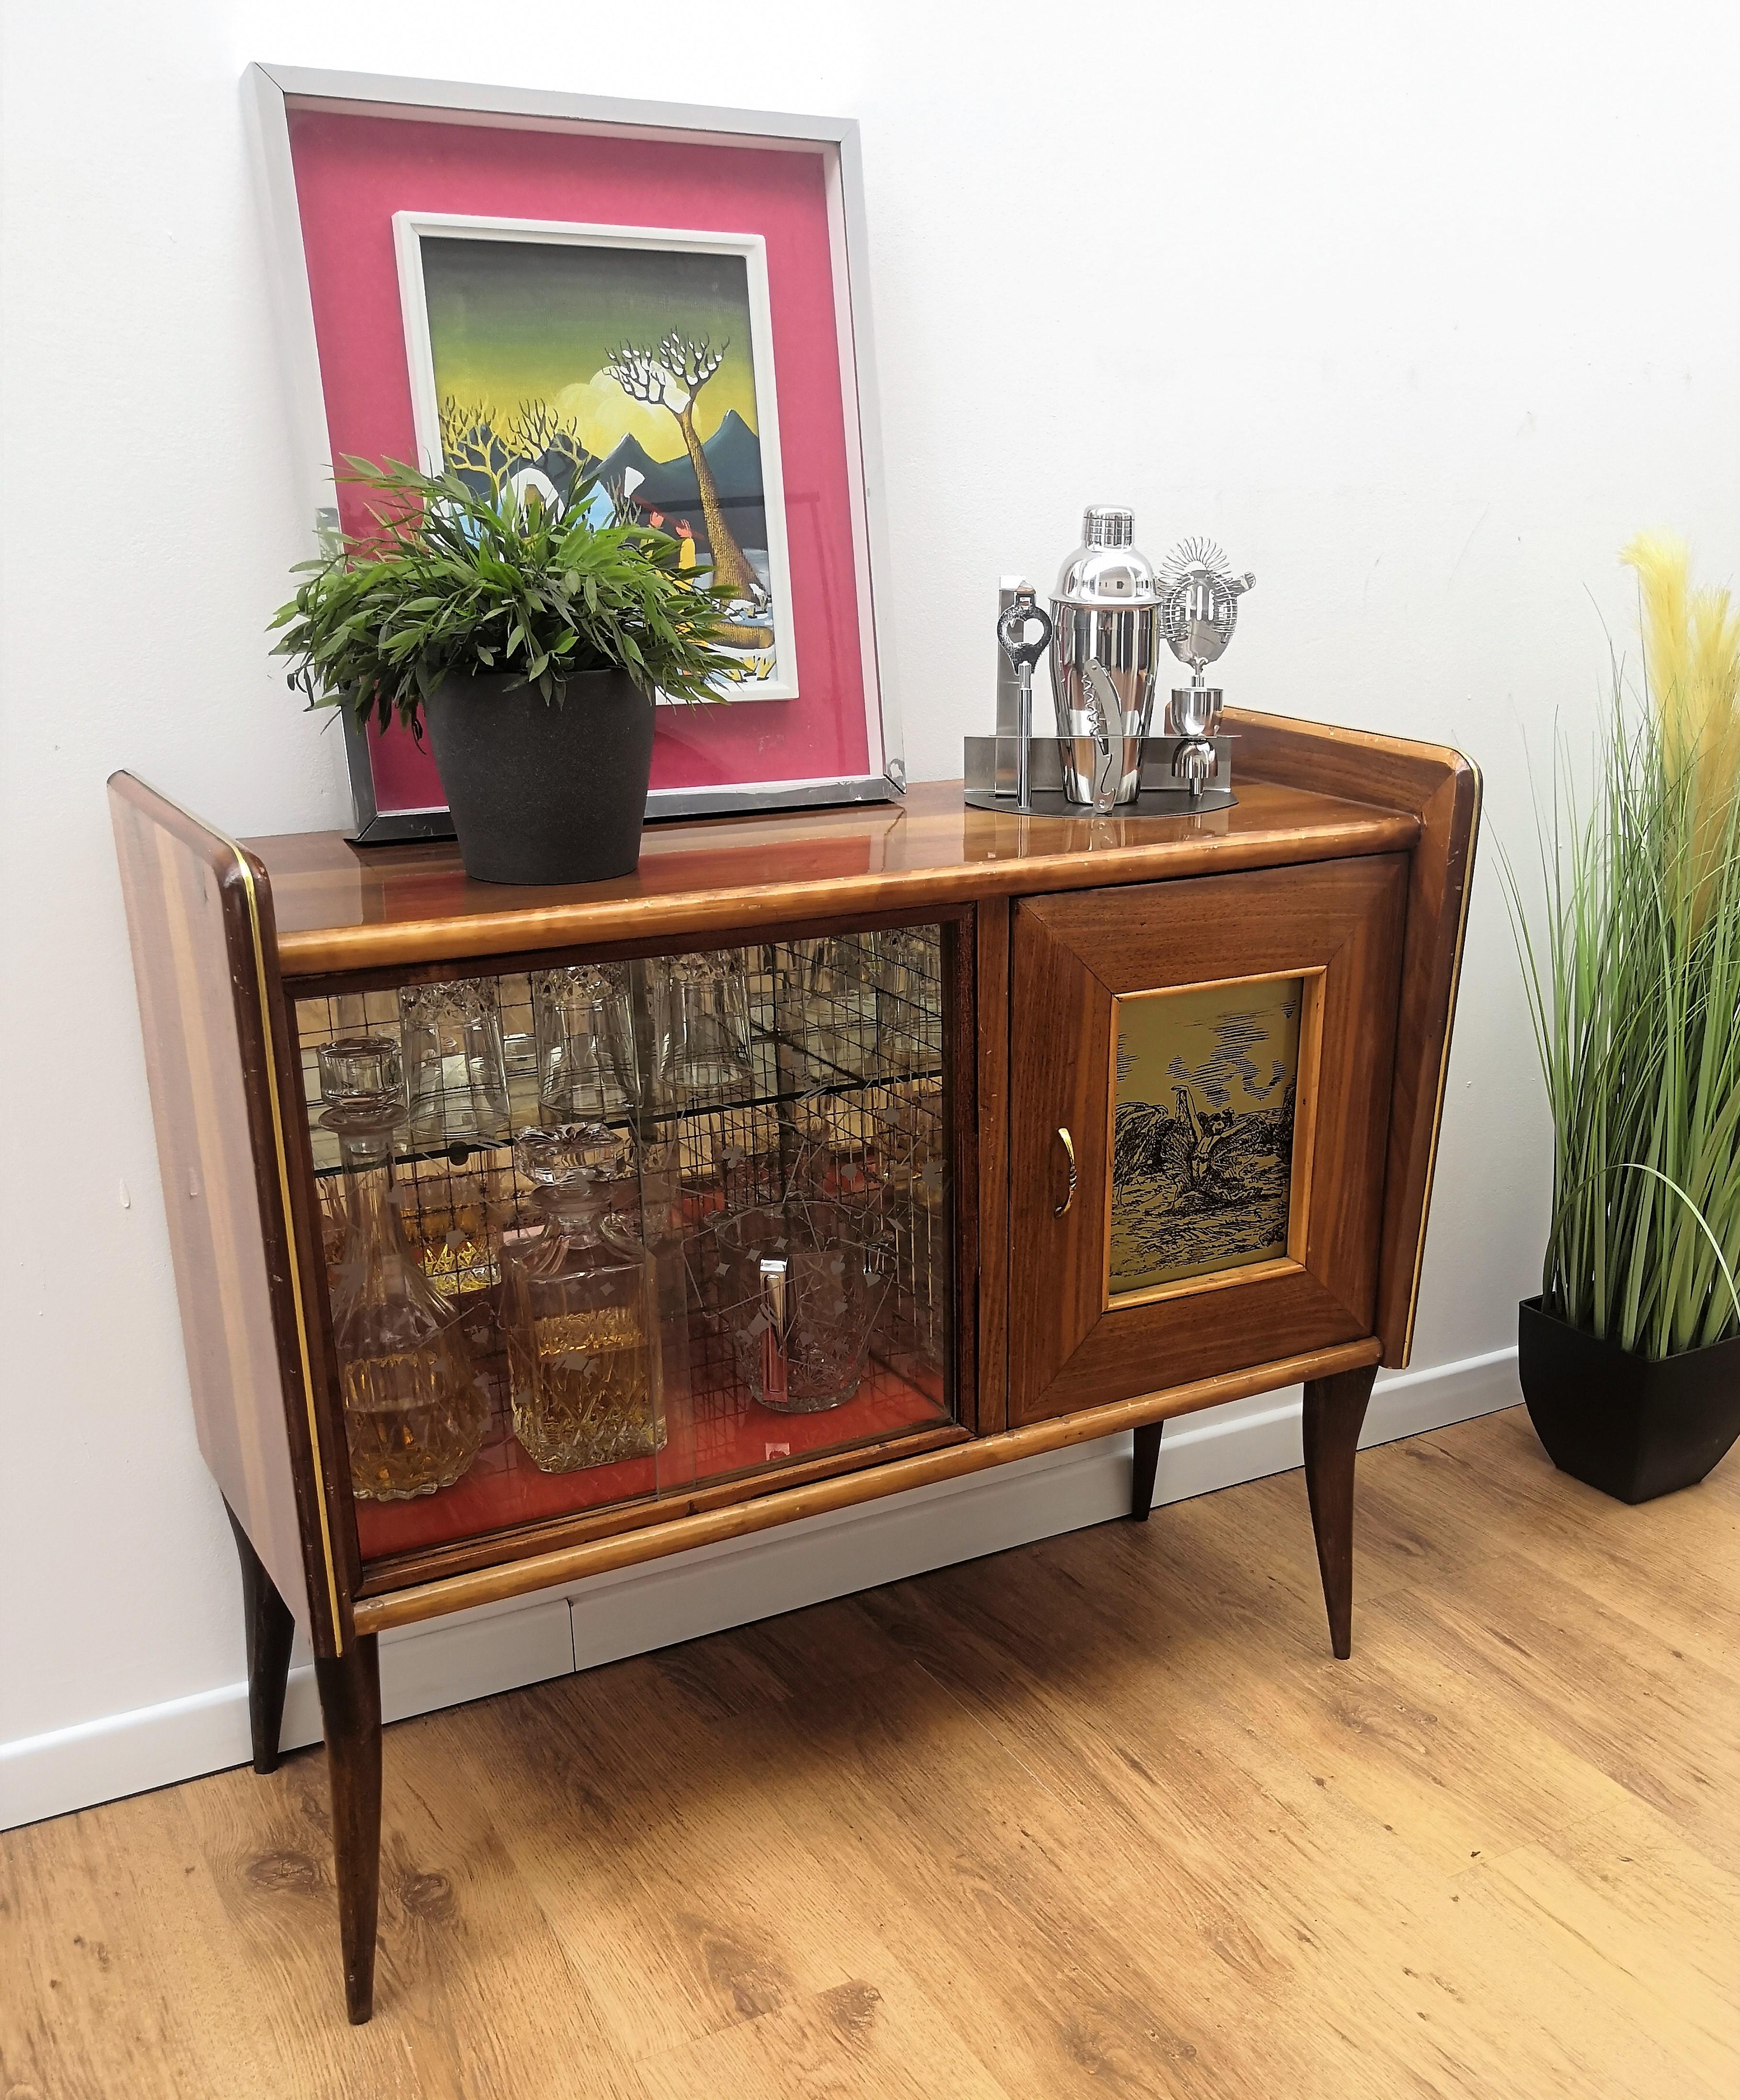 Very elegant Italian Art Deco Mid-Century Modern dry bar cabinet, in walnut with applied veneer, two sliding glass doors with amazing interior part in mirrors mosaic, an original painted wood door and antique brass side inlay and door handle. The